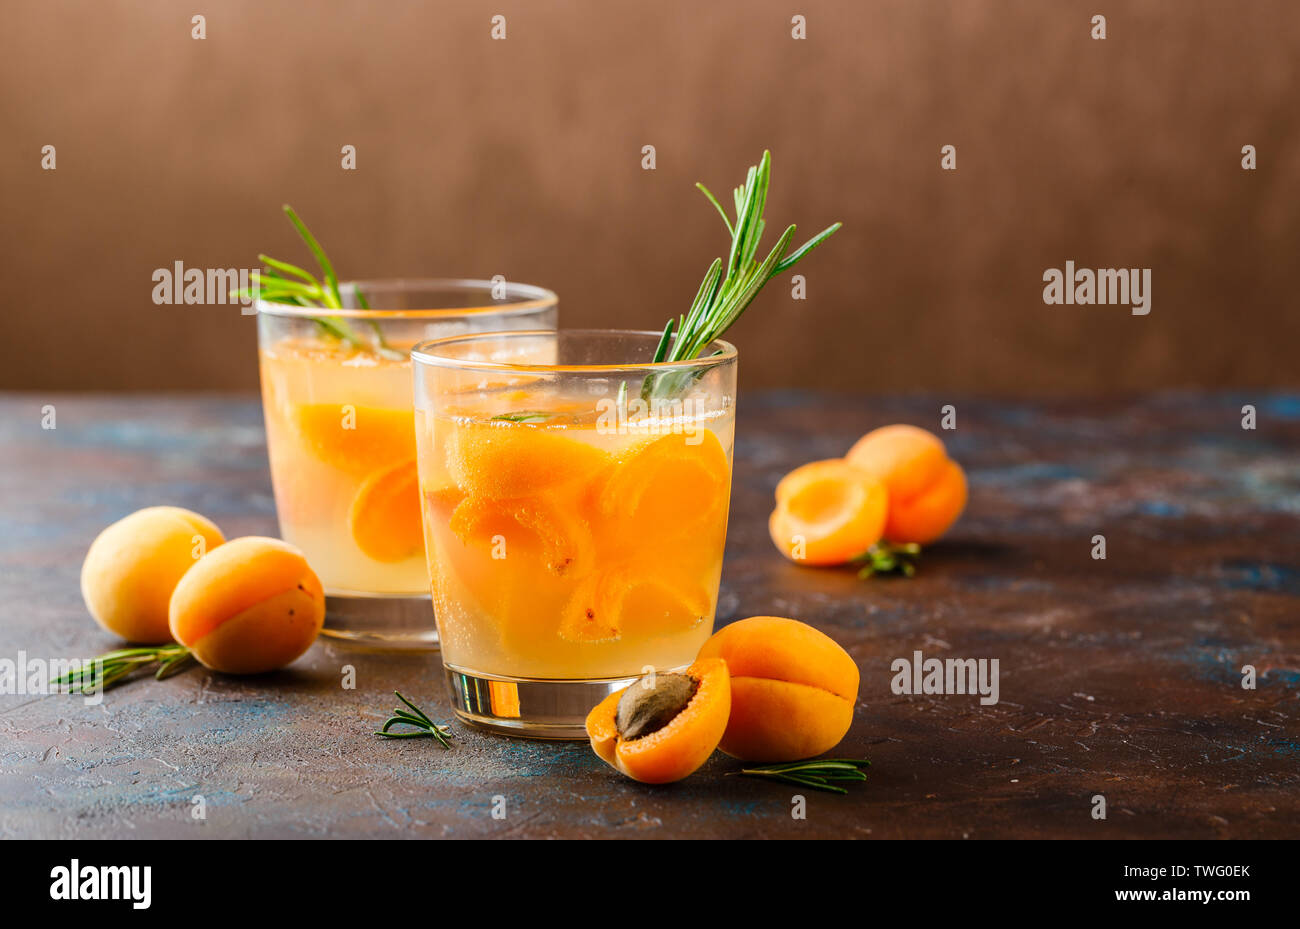 Summer drinks, rosemary aprcot cocktails with ice in glasses. Refreshing summer homemade Alcoholic or non-alcoholic cocktailsor Detox infused flavored Stock Photo